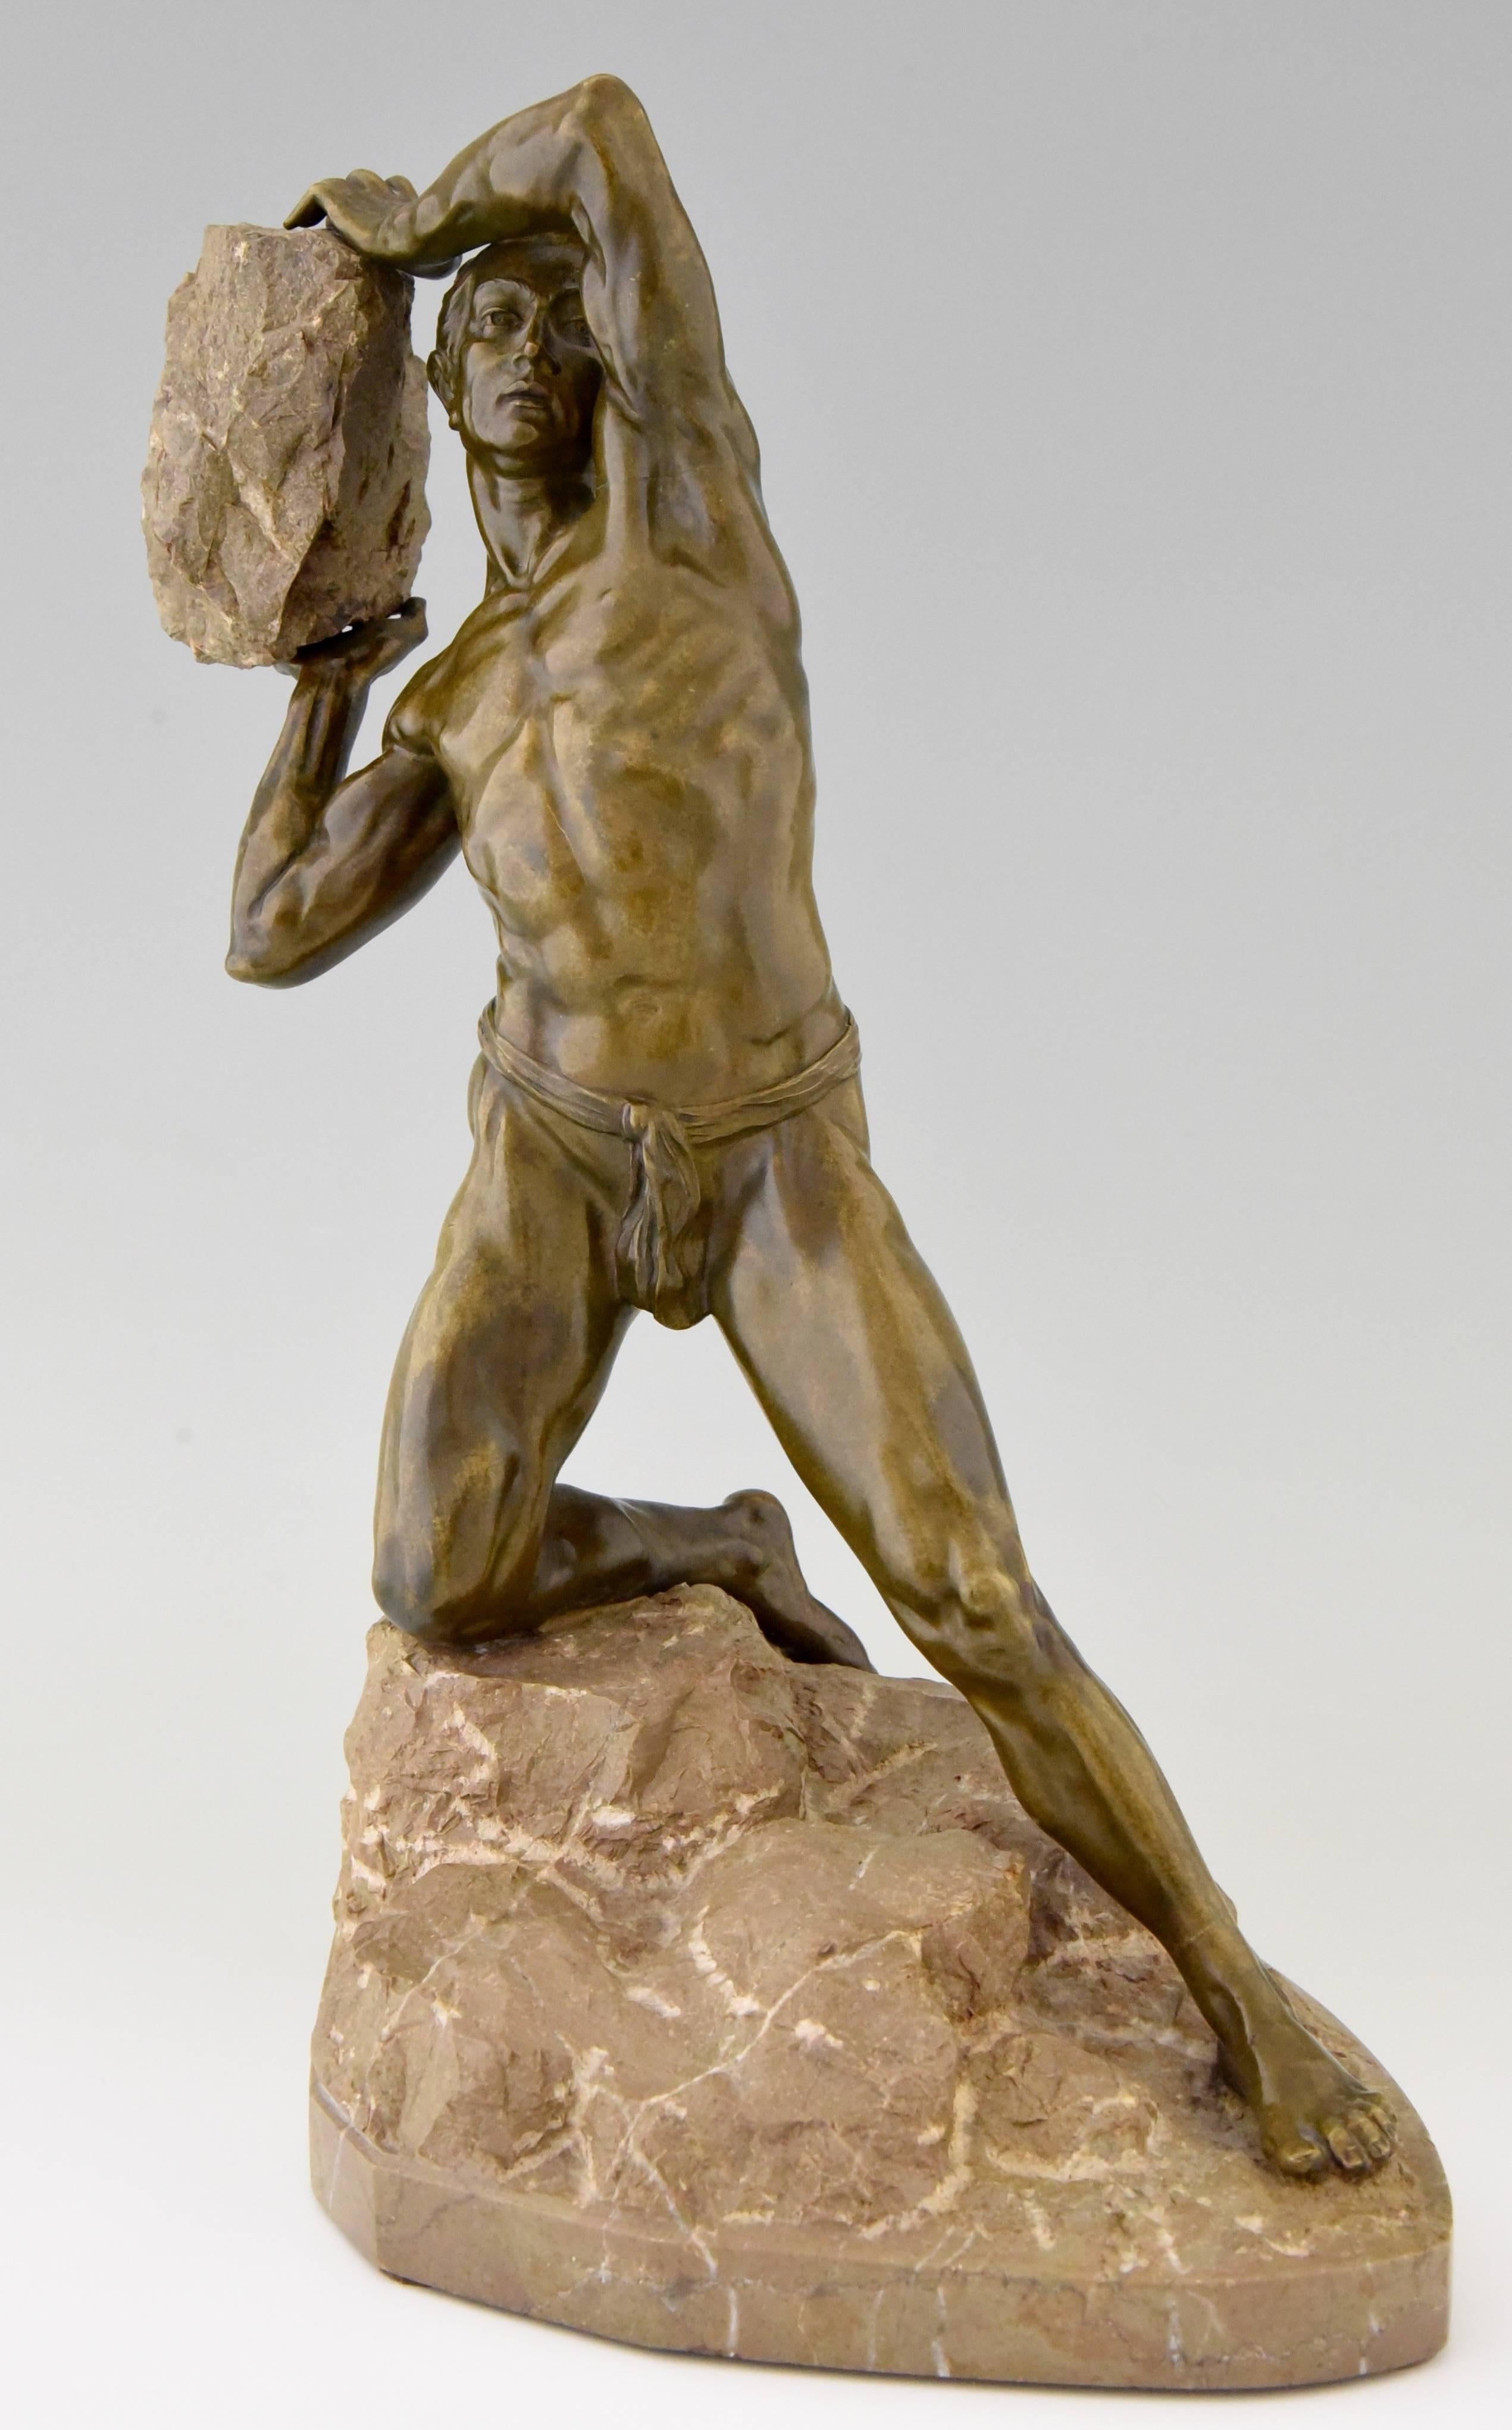 Antique bronze sculpture male nude with rock.

Date:
1900.
Material:
Bronze and marble.
Origin:
Europe.
Size cm:
Measures: H. 43 cm. x L. 32 cm. x W. 32 cm. 
Size inch:
H. 16.9 inch x L. 12.6 inch x W. 8.7 inch.
Condition:
Very good